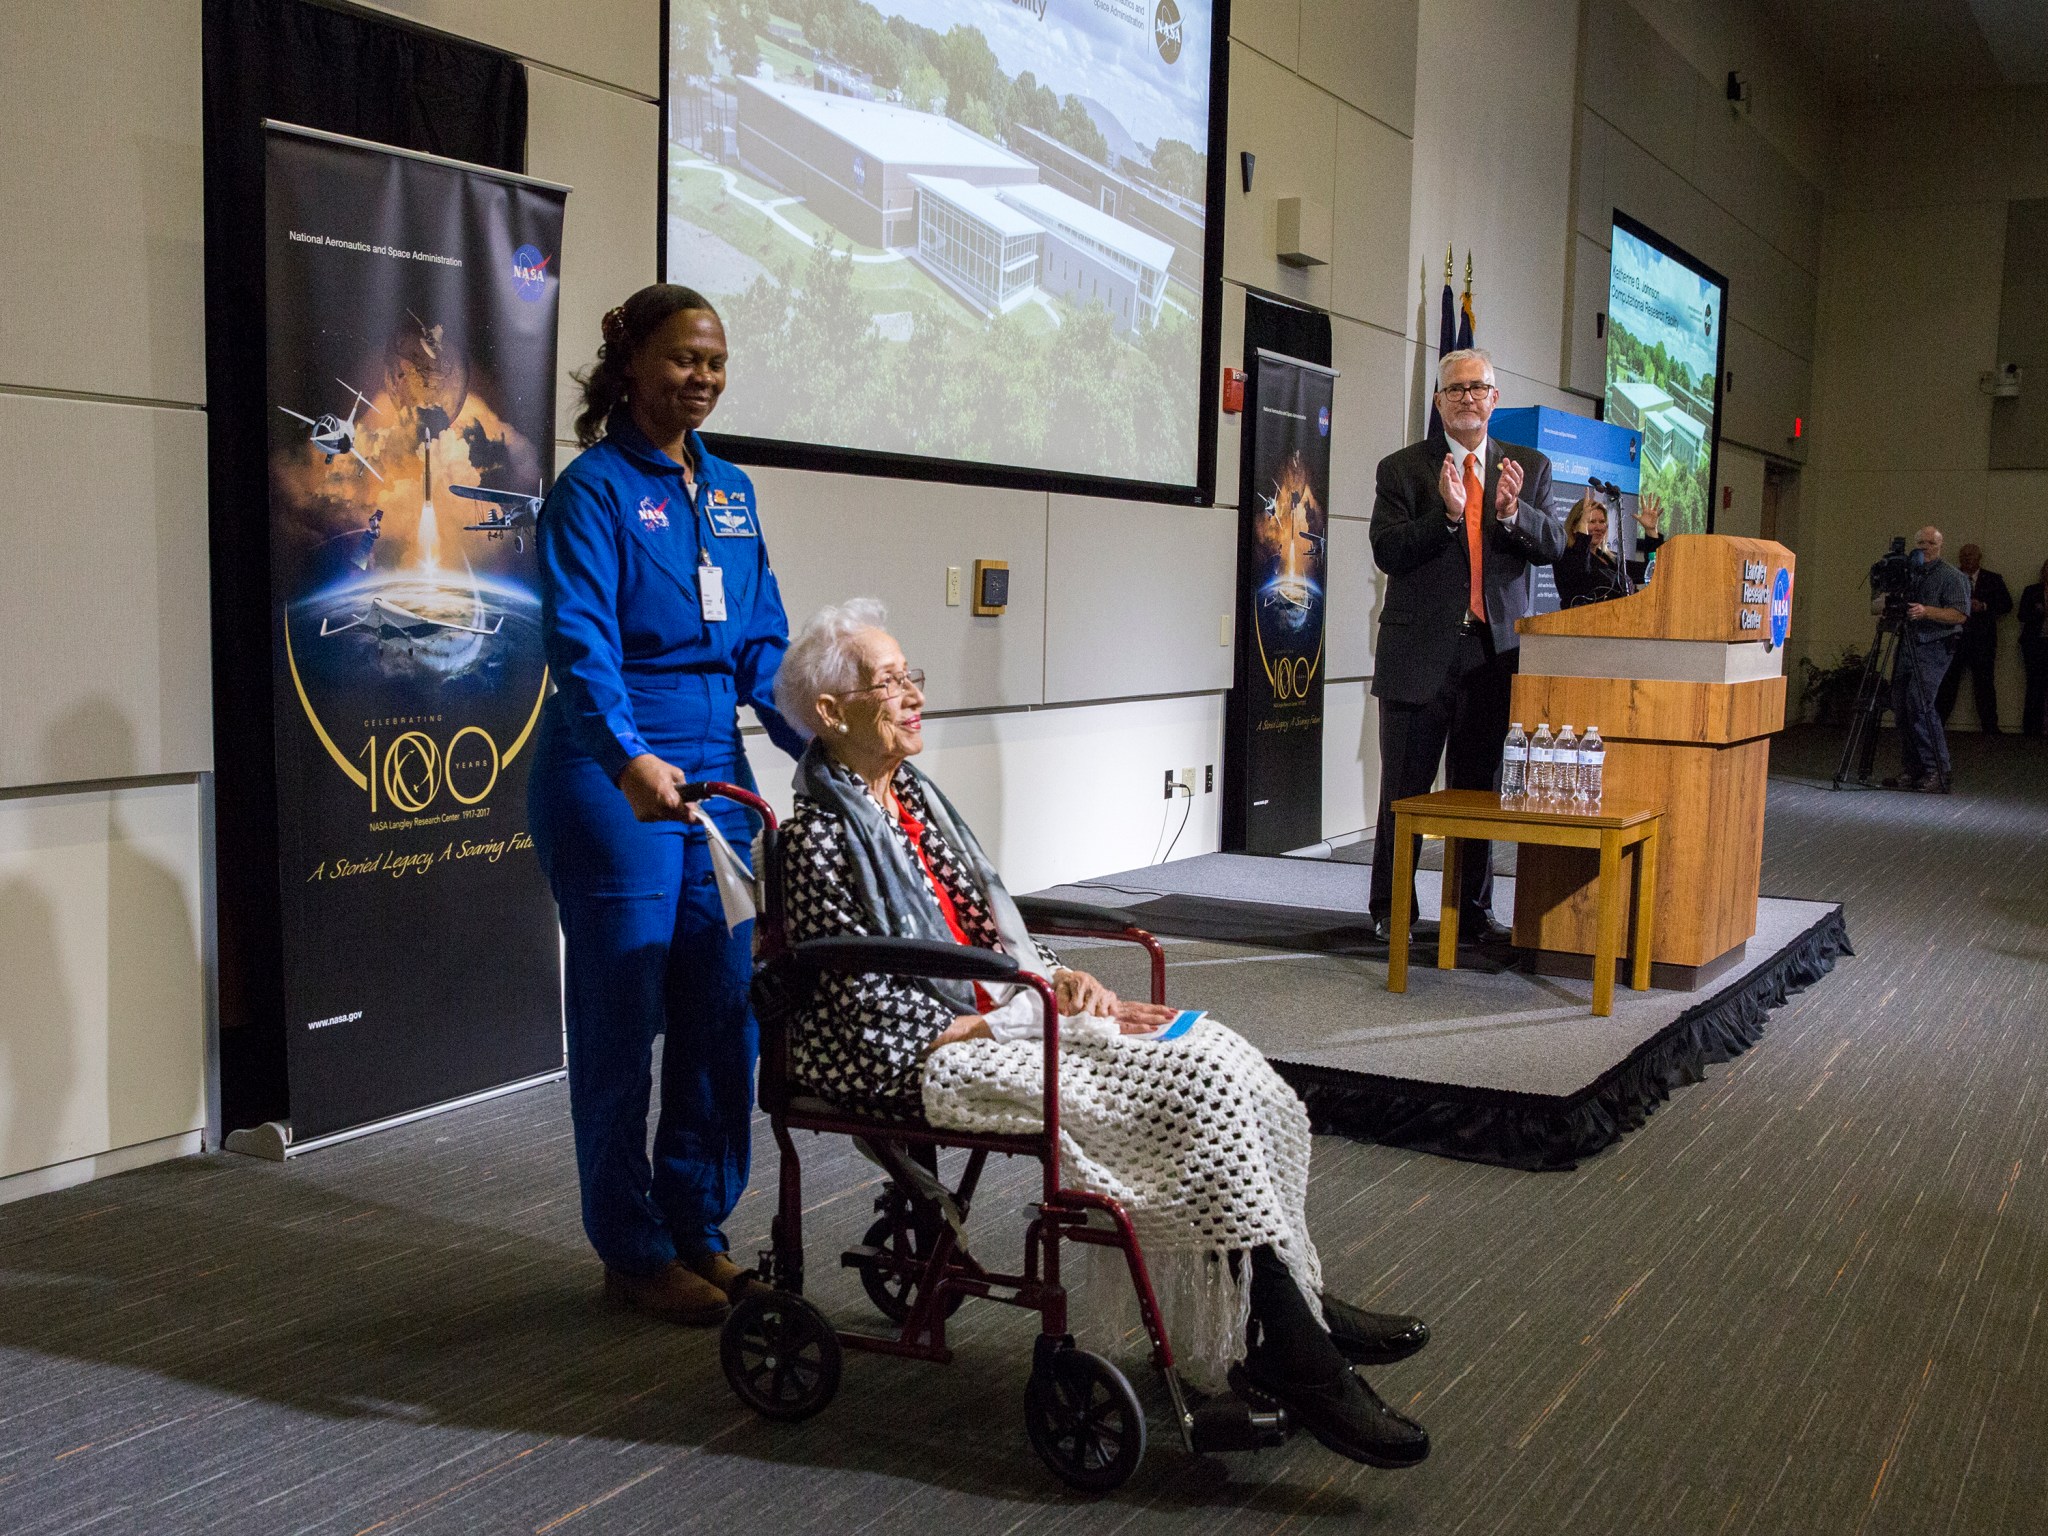 Astronaut Dr. Yvonne Cagle is with Johnson as she receives a standing ovation from the crowd at the ribbon-cutting ceremony.